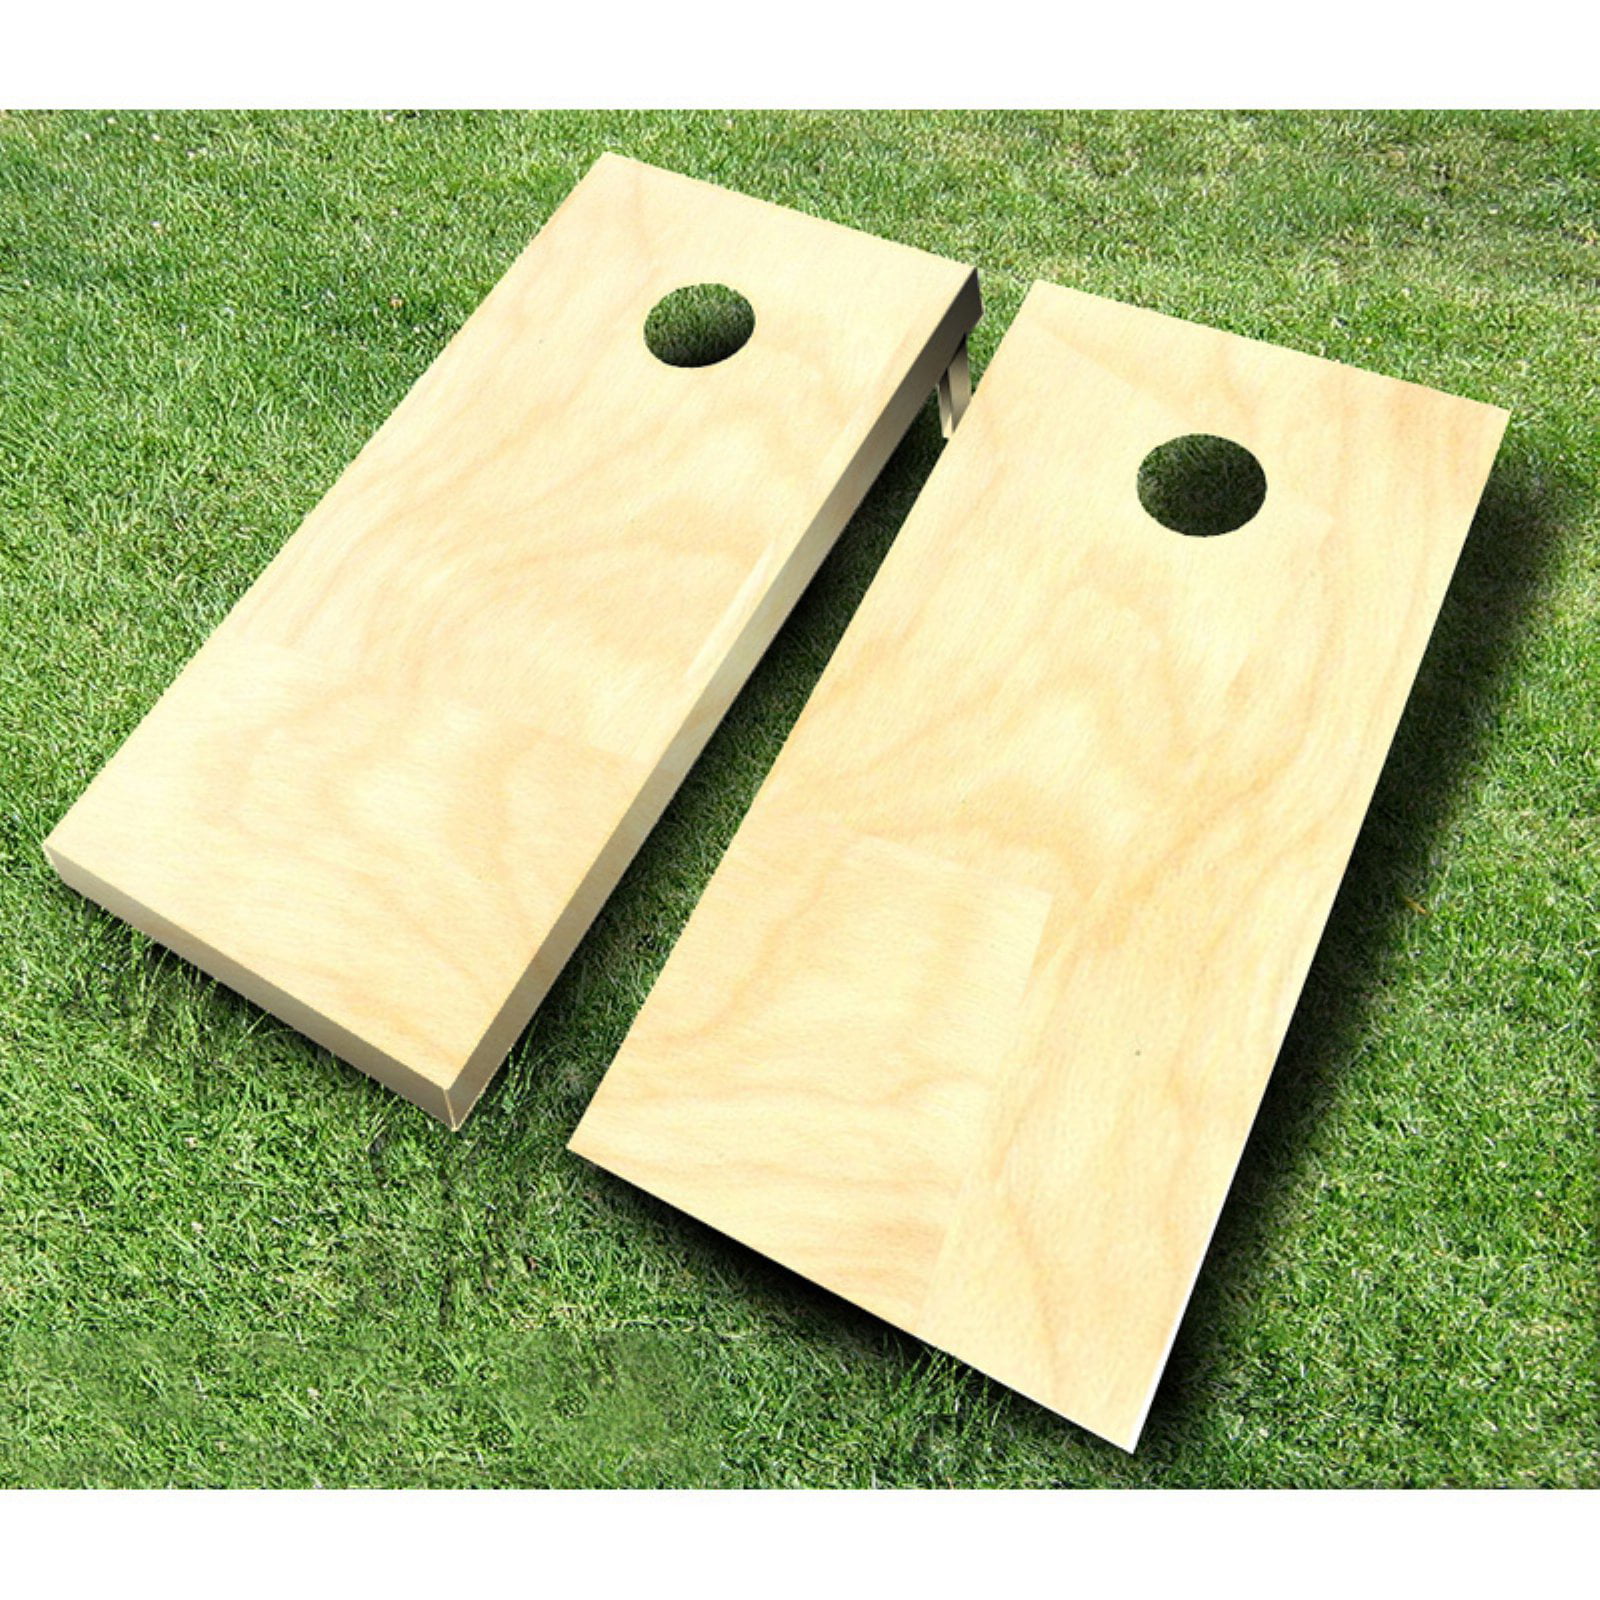 Details about   All-Wood Cornhole Set Includes Two Cornhole Boards and Eight Bags More 